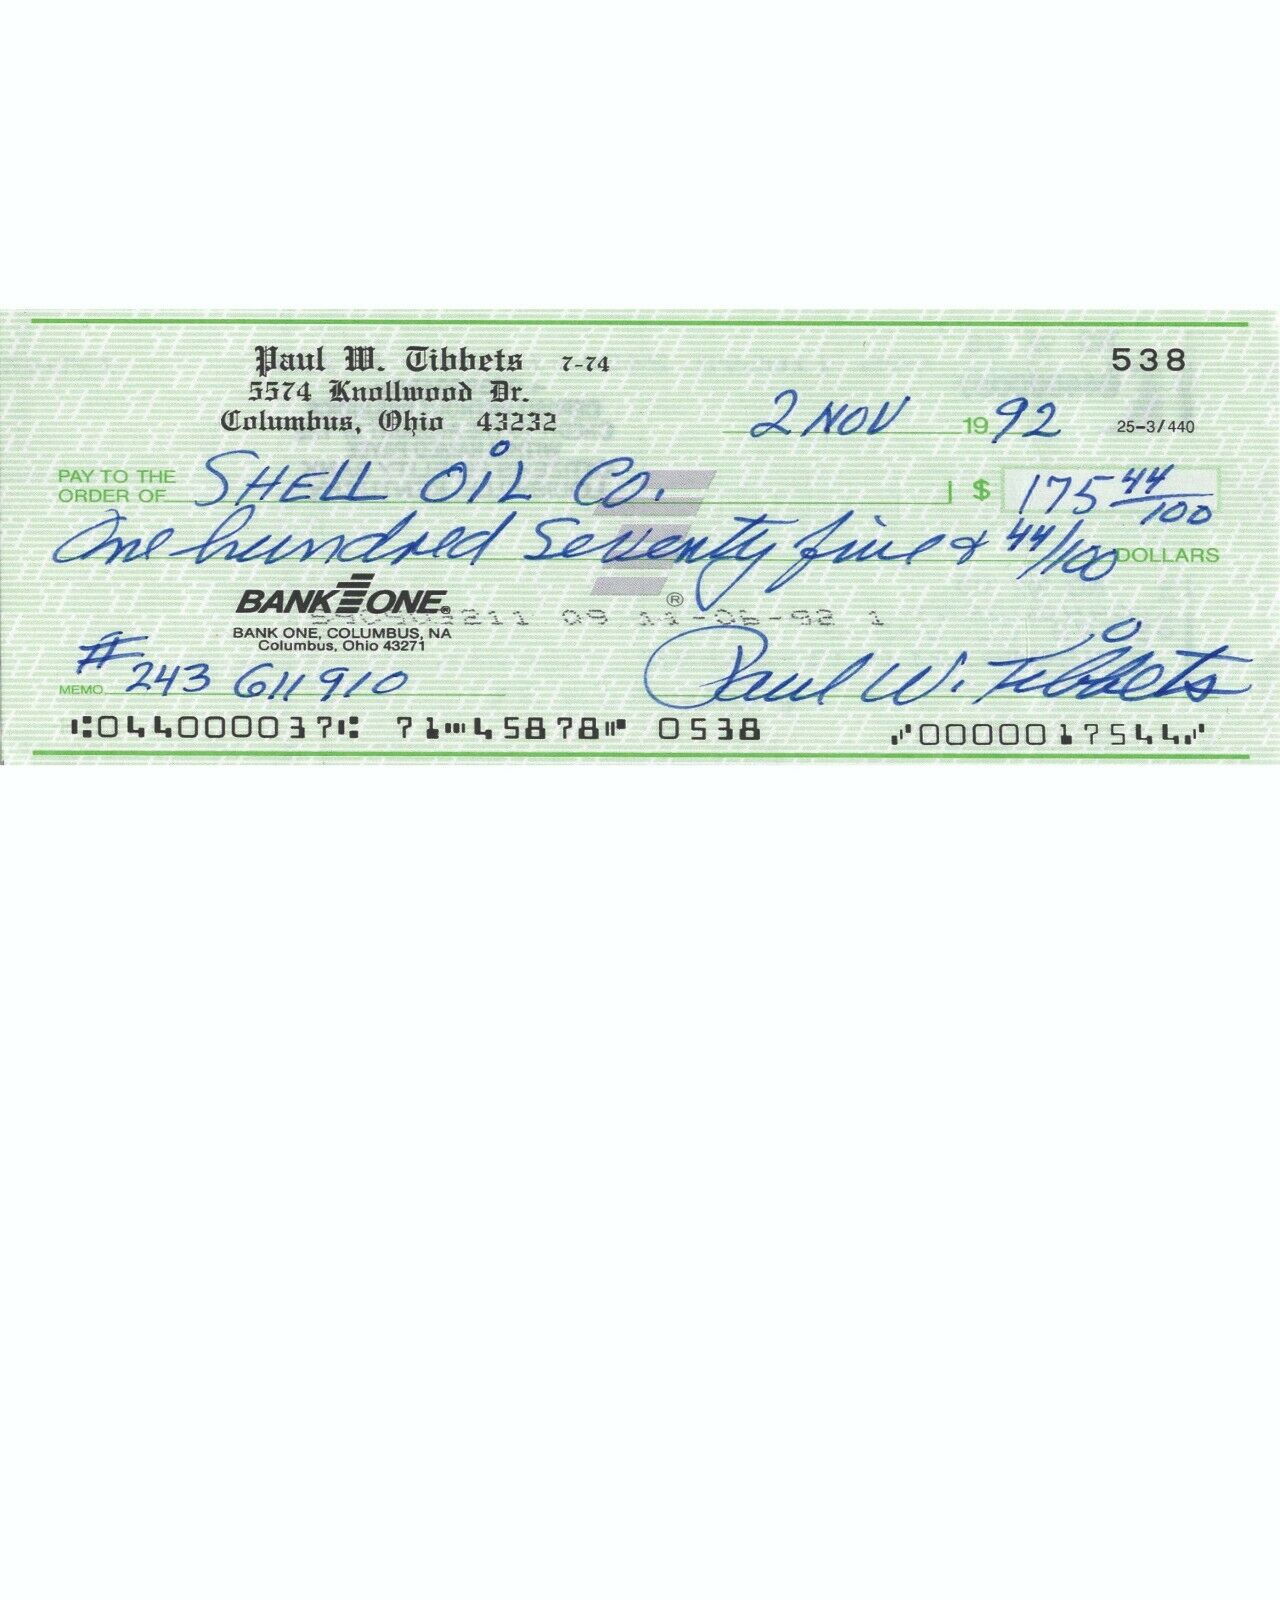 Paul Tibbets Reproduction Cancelled Check and 8 x 10 Photo 